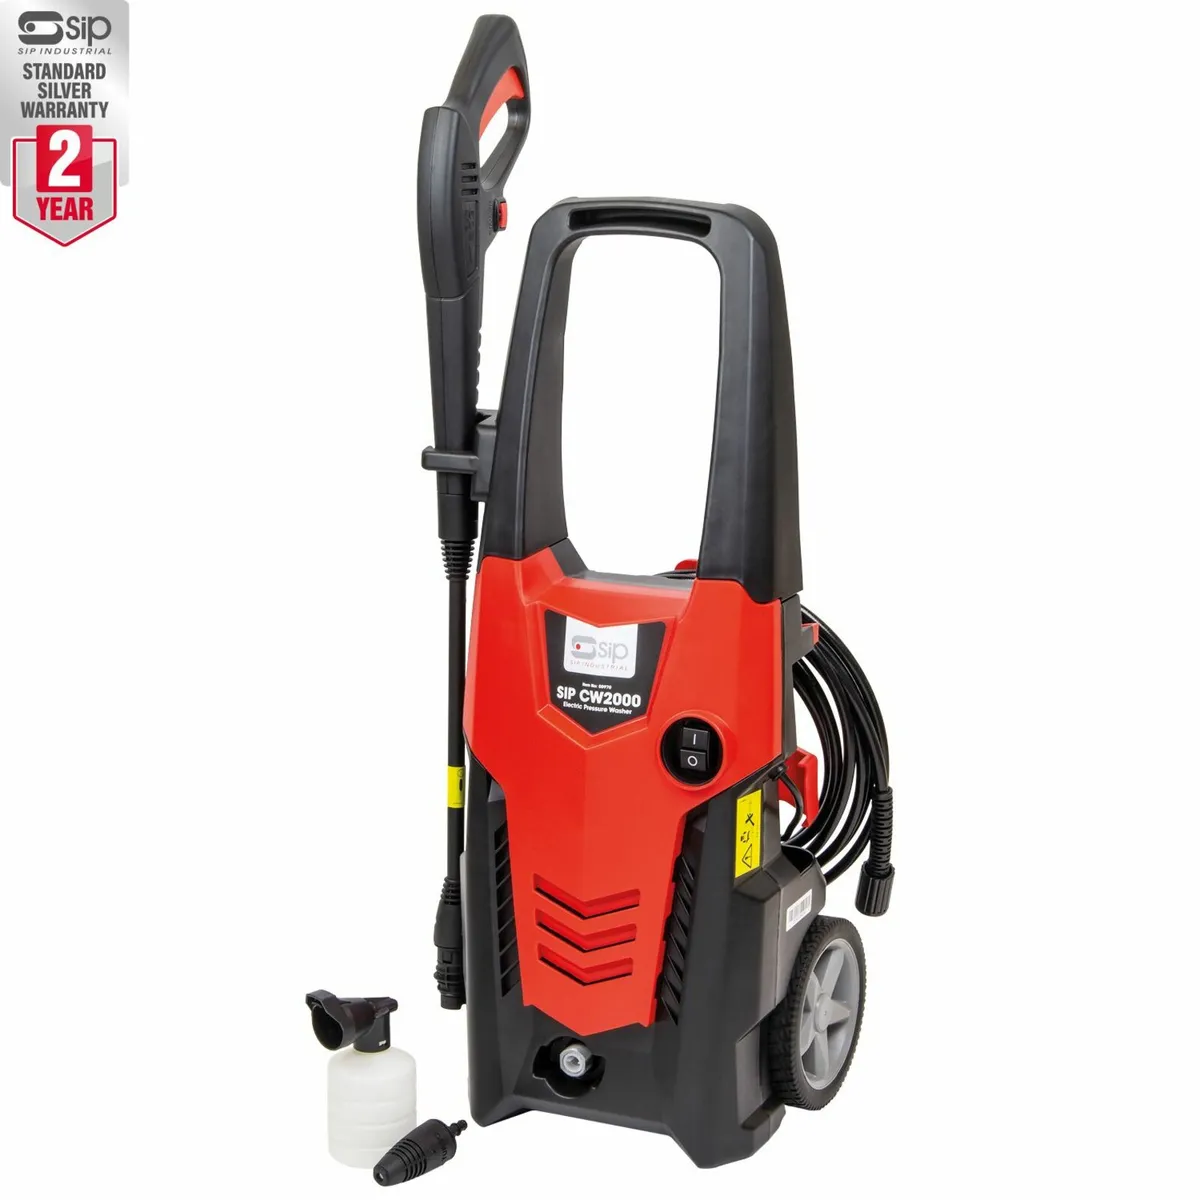 SIP CW2000 Electric Pressure Washer (2030psi) - Image 1